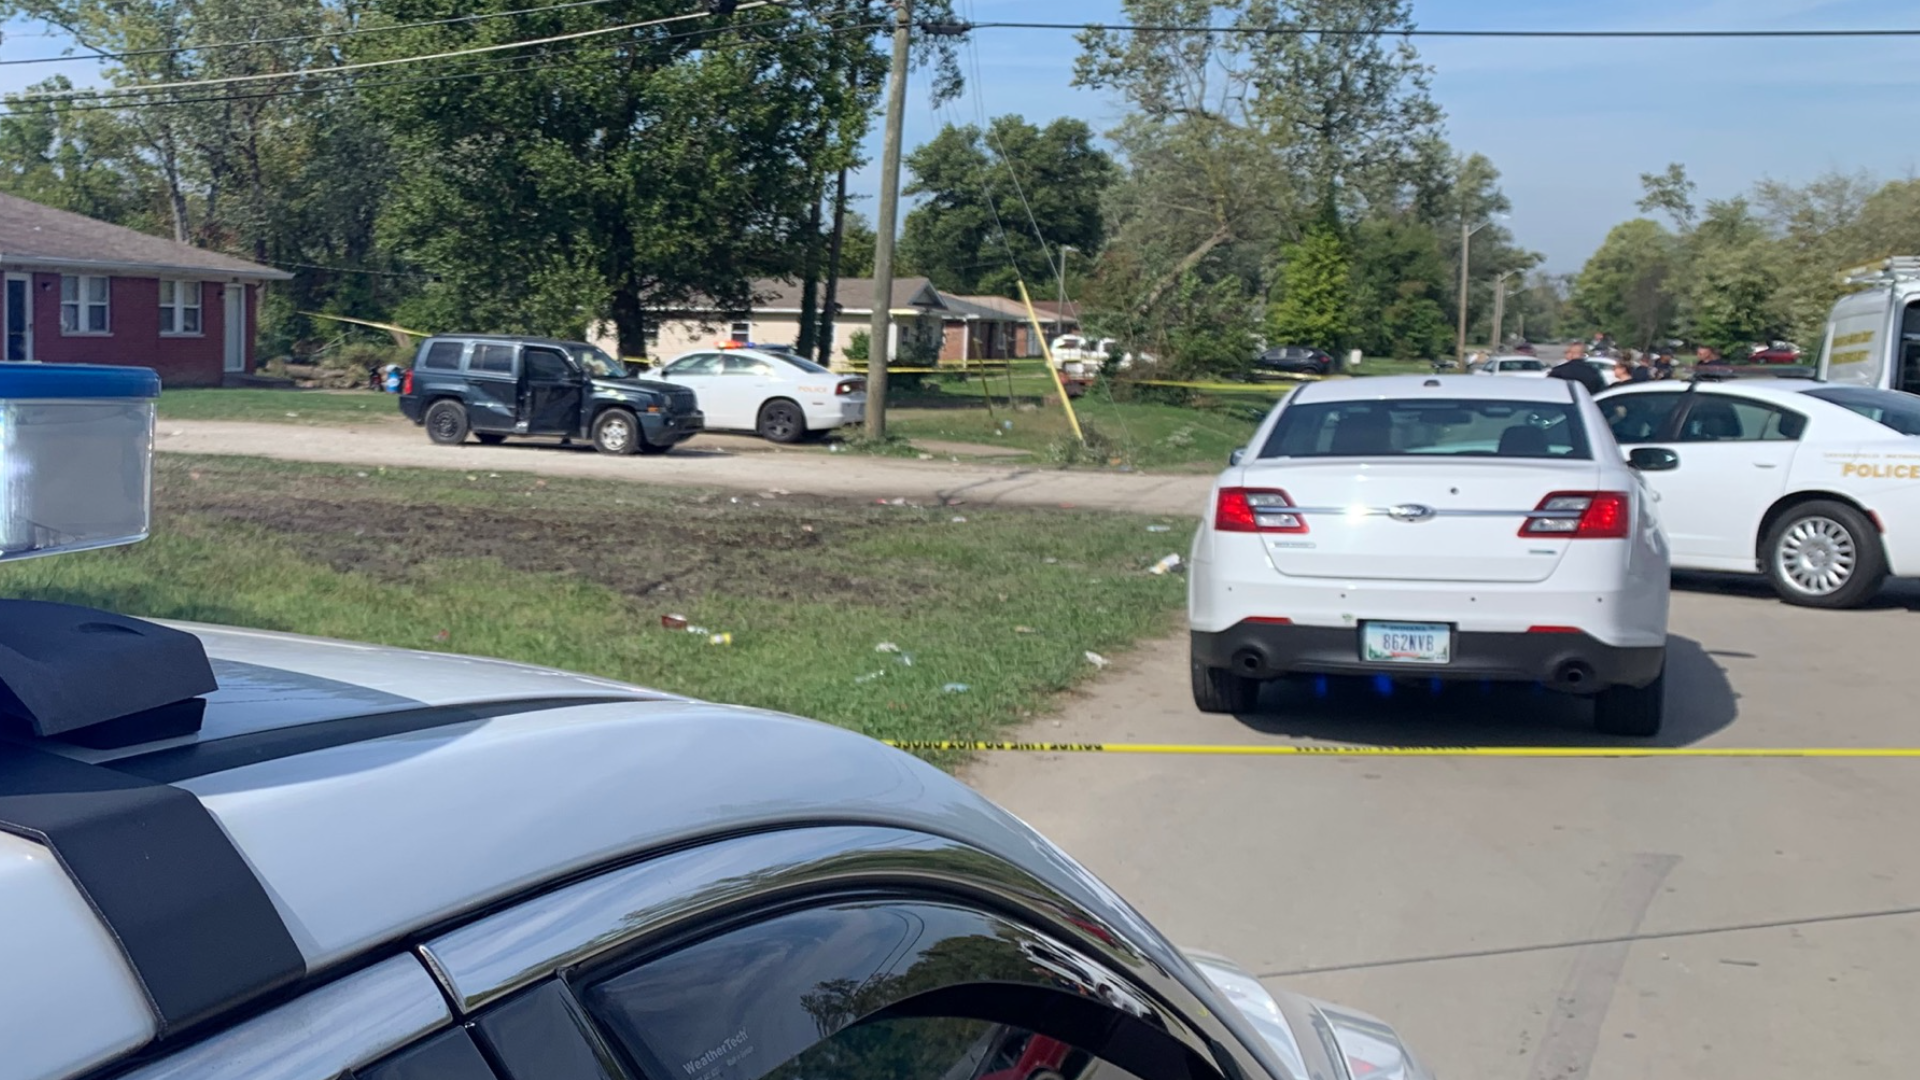 Police said the shooting happened near 38th Street and Emerson Avenue Monday afternoon.